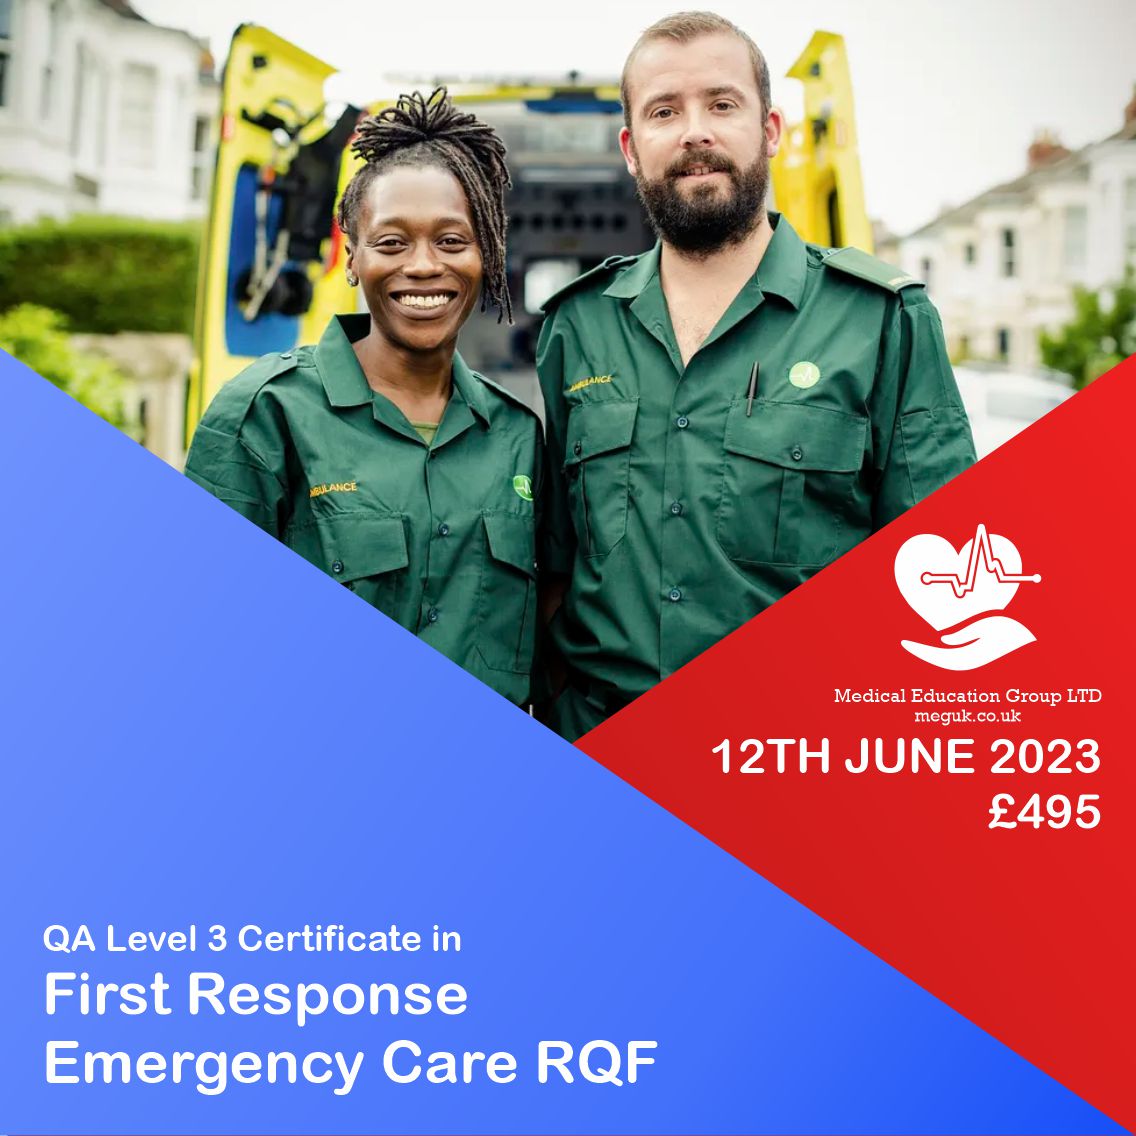 Level 3 Award in First Response Emergency Care.

5-day course starting Monday 12th June 2023 in Ellesmere Port. Course cost £495.

For further information and bookings please contact us at education@meguk.co.uk

#FirstResponse #FirstResponder #EmergencyCare #FREC3 #EllesmerePort